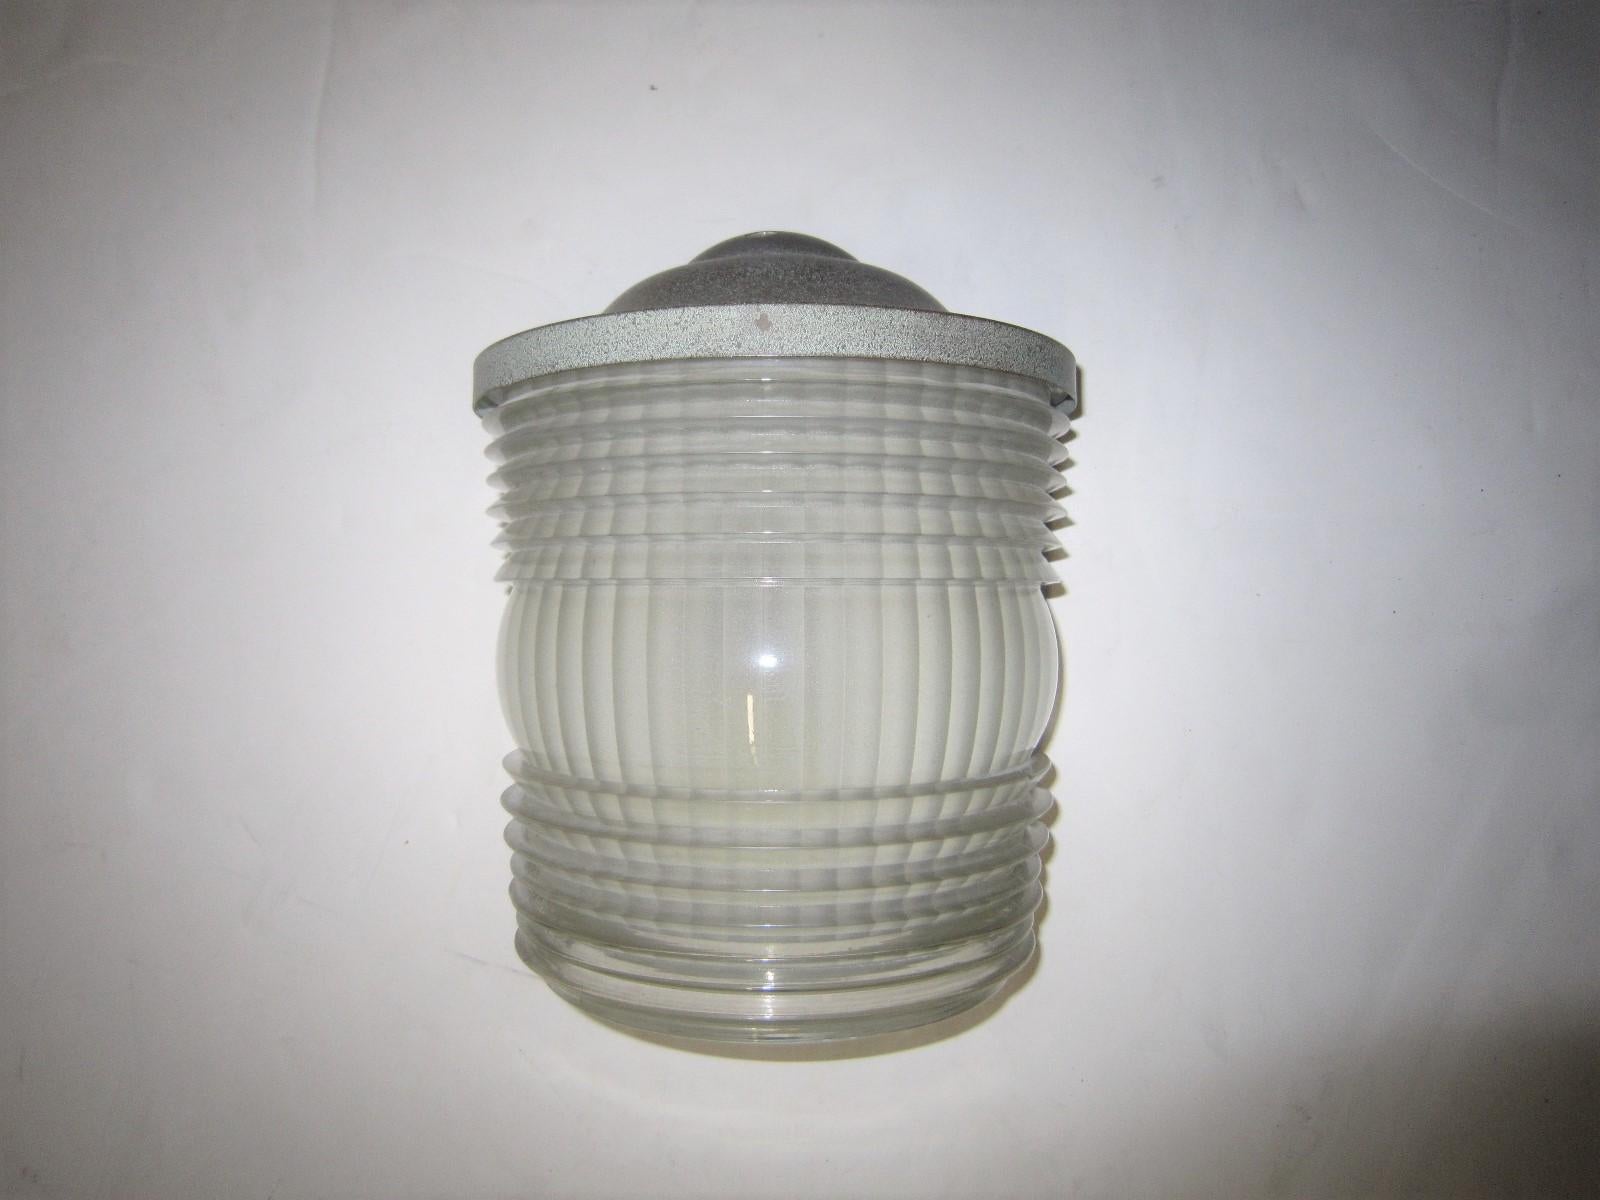 A single original Art Moderne semi-cylindrical sconce spotlighting a heavily molded polished art glass sheath
with linear pattern and original mounts. Signed by the maker J. Perzel
French Modernist and highly architectural with clean lines,